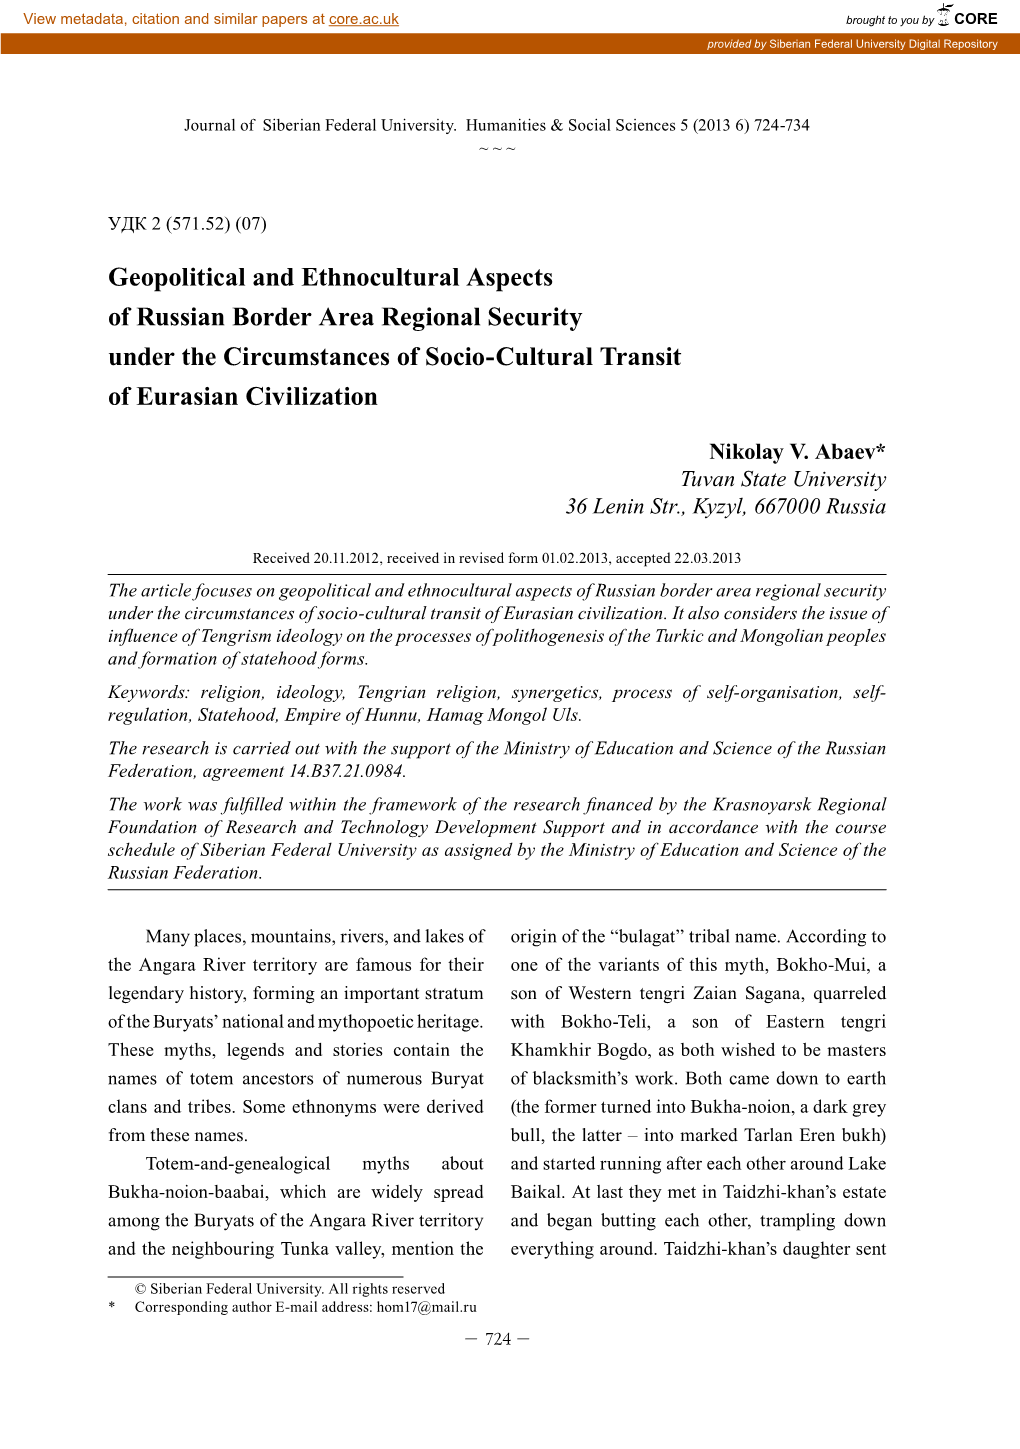 Geopolitical and Ethnocultural Aspects of Russian Border Area Regional Security Under the Circumstances of Socio-Cultural Transit of Eurasian Civilization